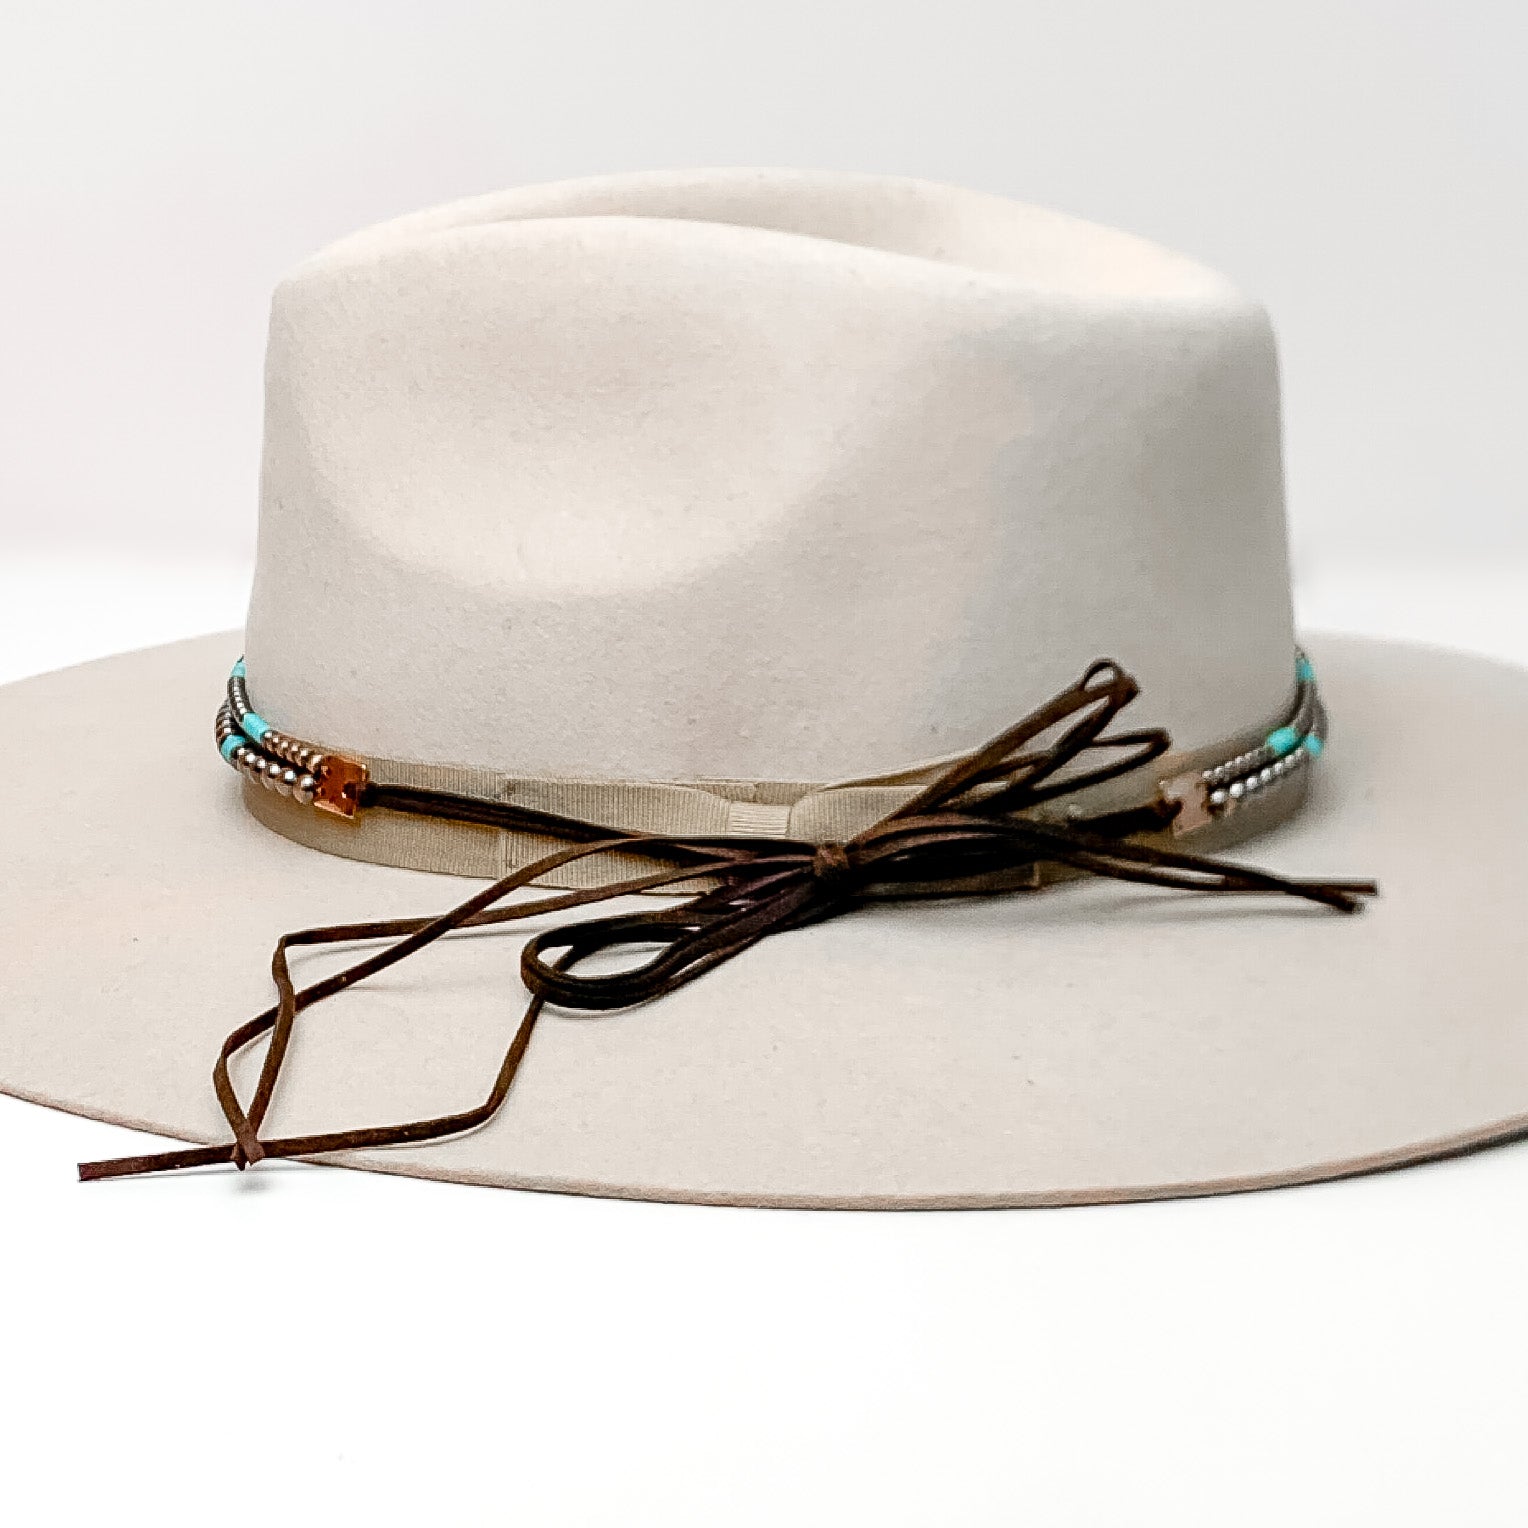 Copper Tone and Turquoise Pearl Hat Band With Black Tie Strings - Giddy Up Glamour Boutique